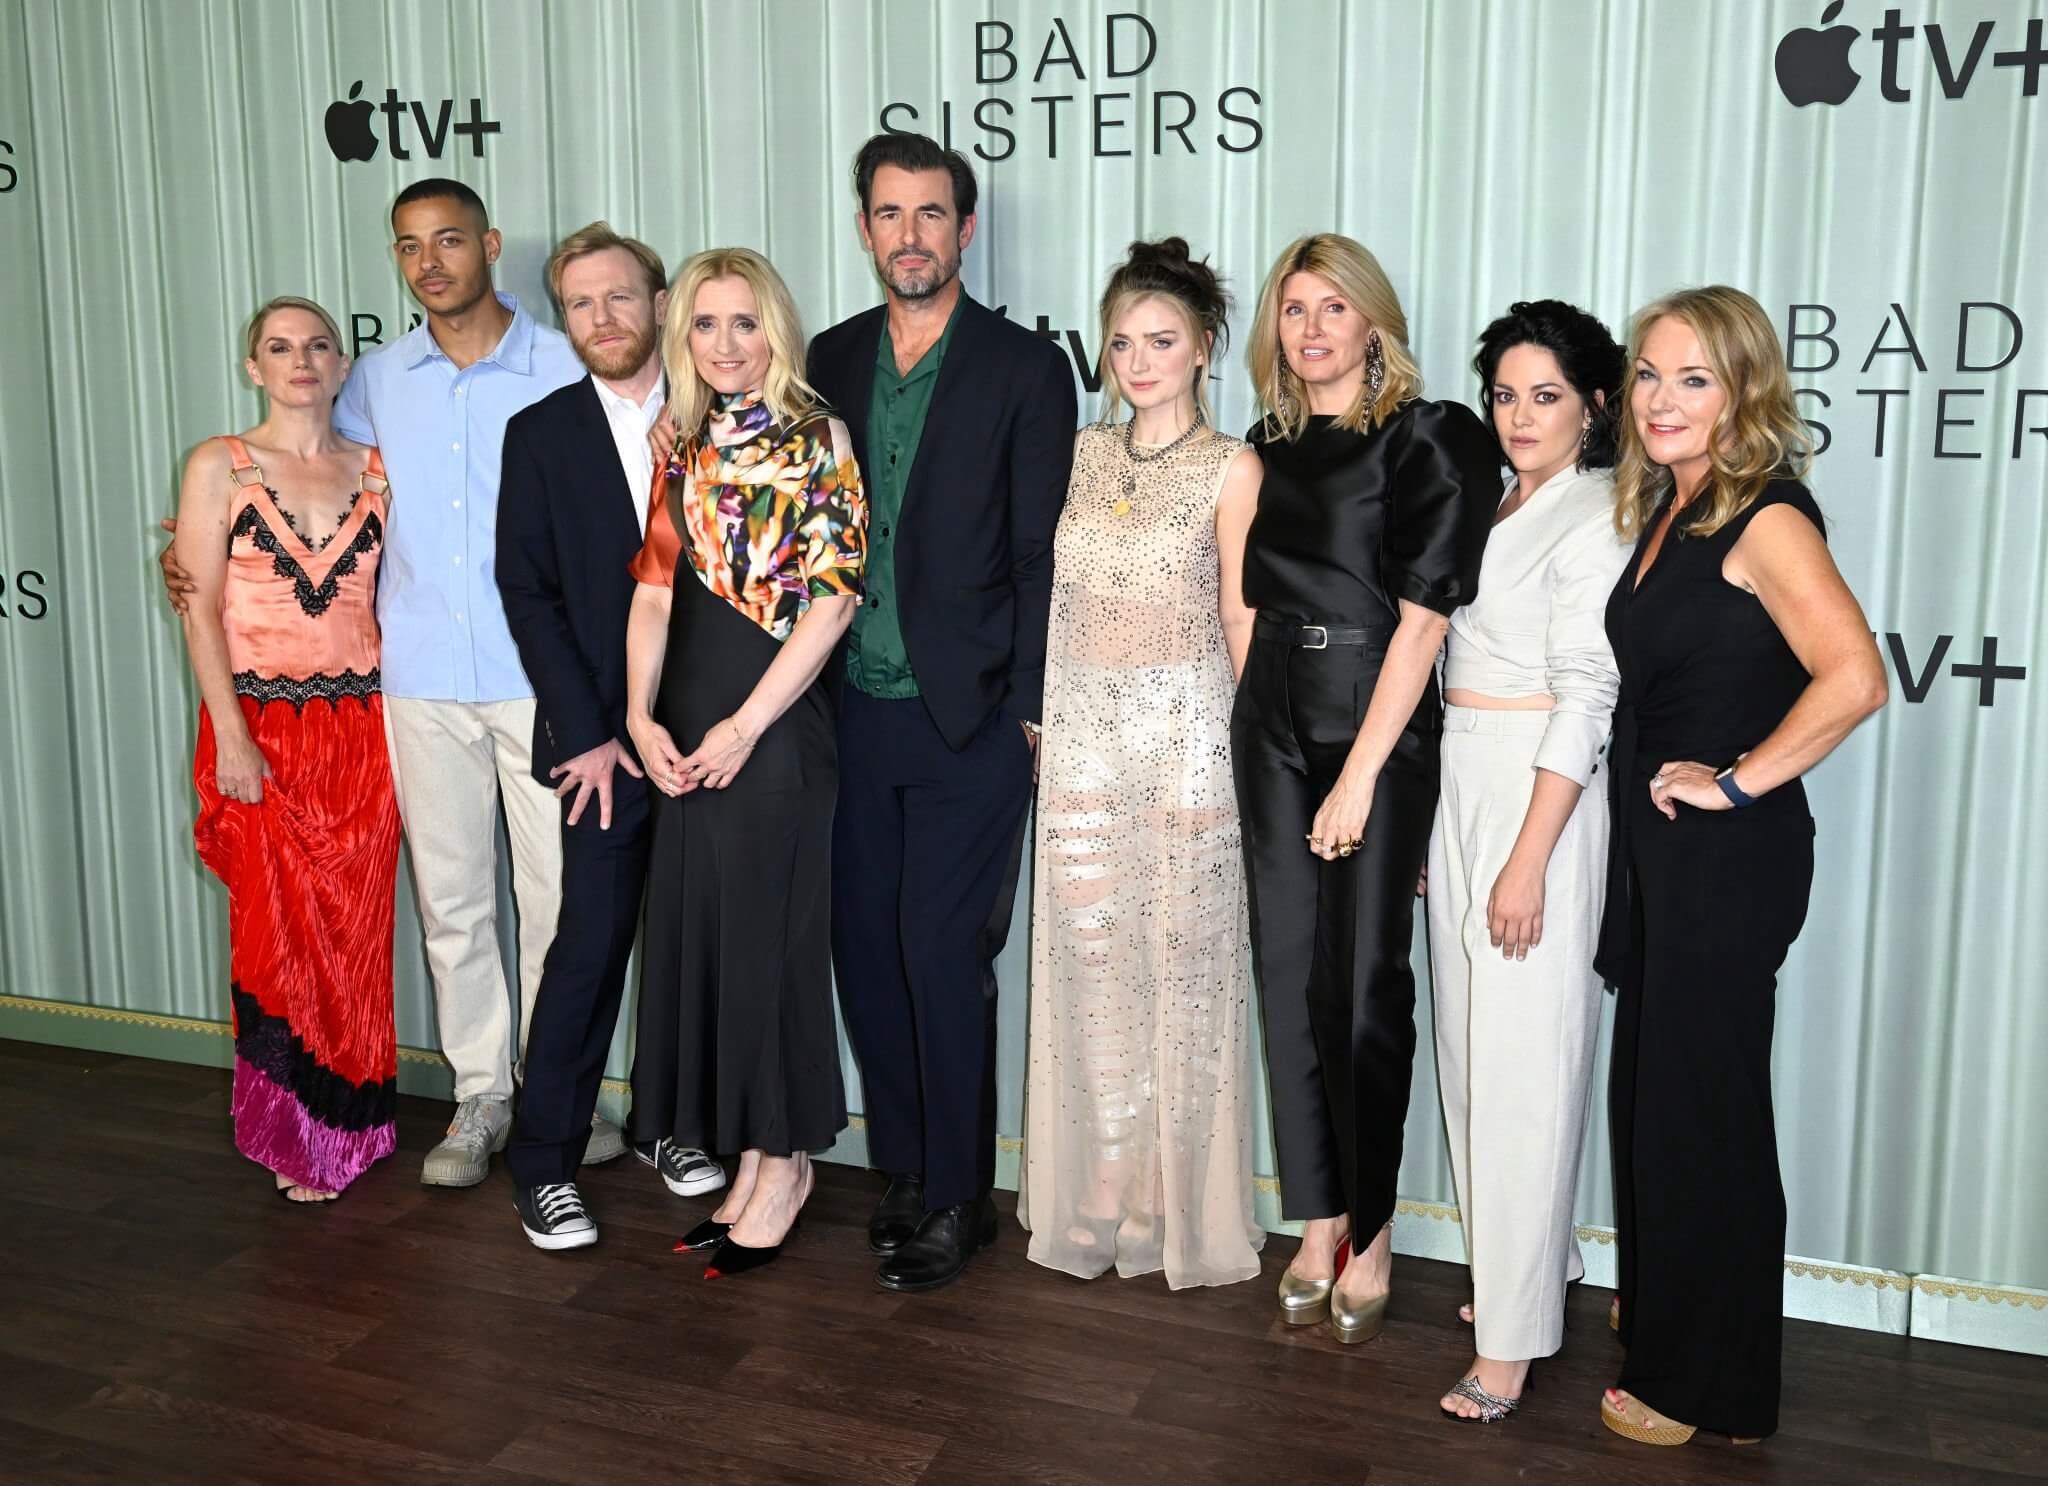 (L-R) Eva Birthistle, Daryl McCormack, Brian Gleeson, Anne-Marie Duff, Claes Bang, Eve Hewson, Sharon Horgan, Sarah Greene, Eva Birthistle and Jay Hunt attend the Bad Sisters London Premiere at BFI Southbank on August 18, 2022 in London, England.